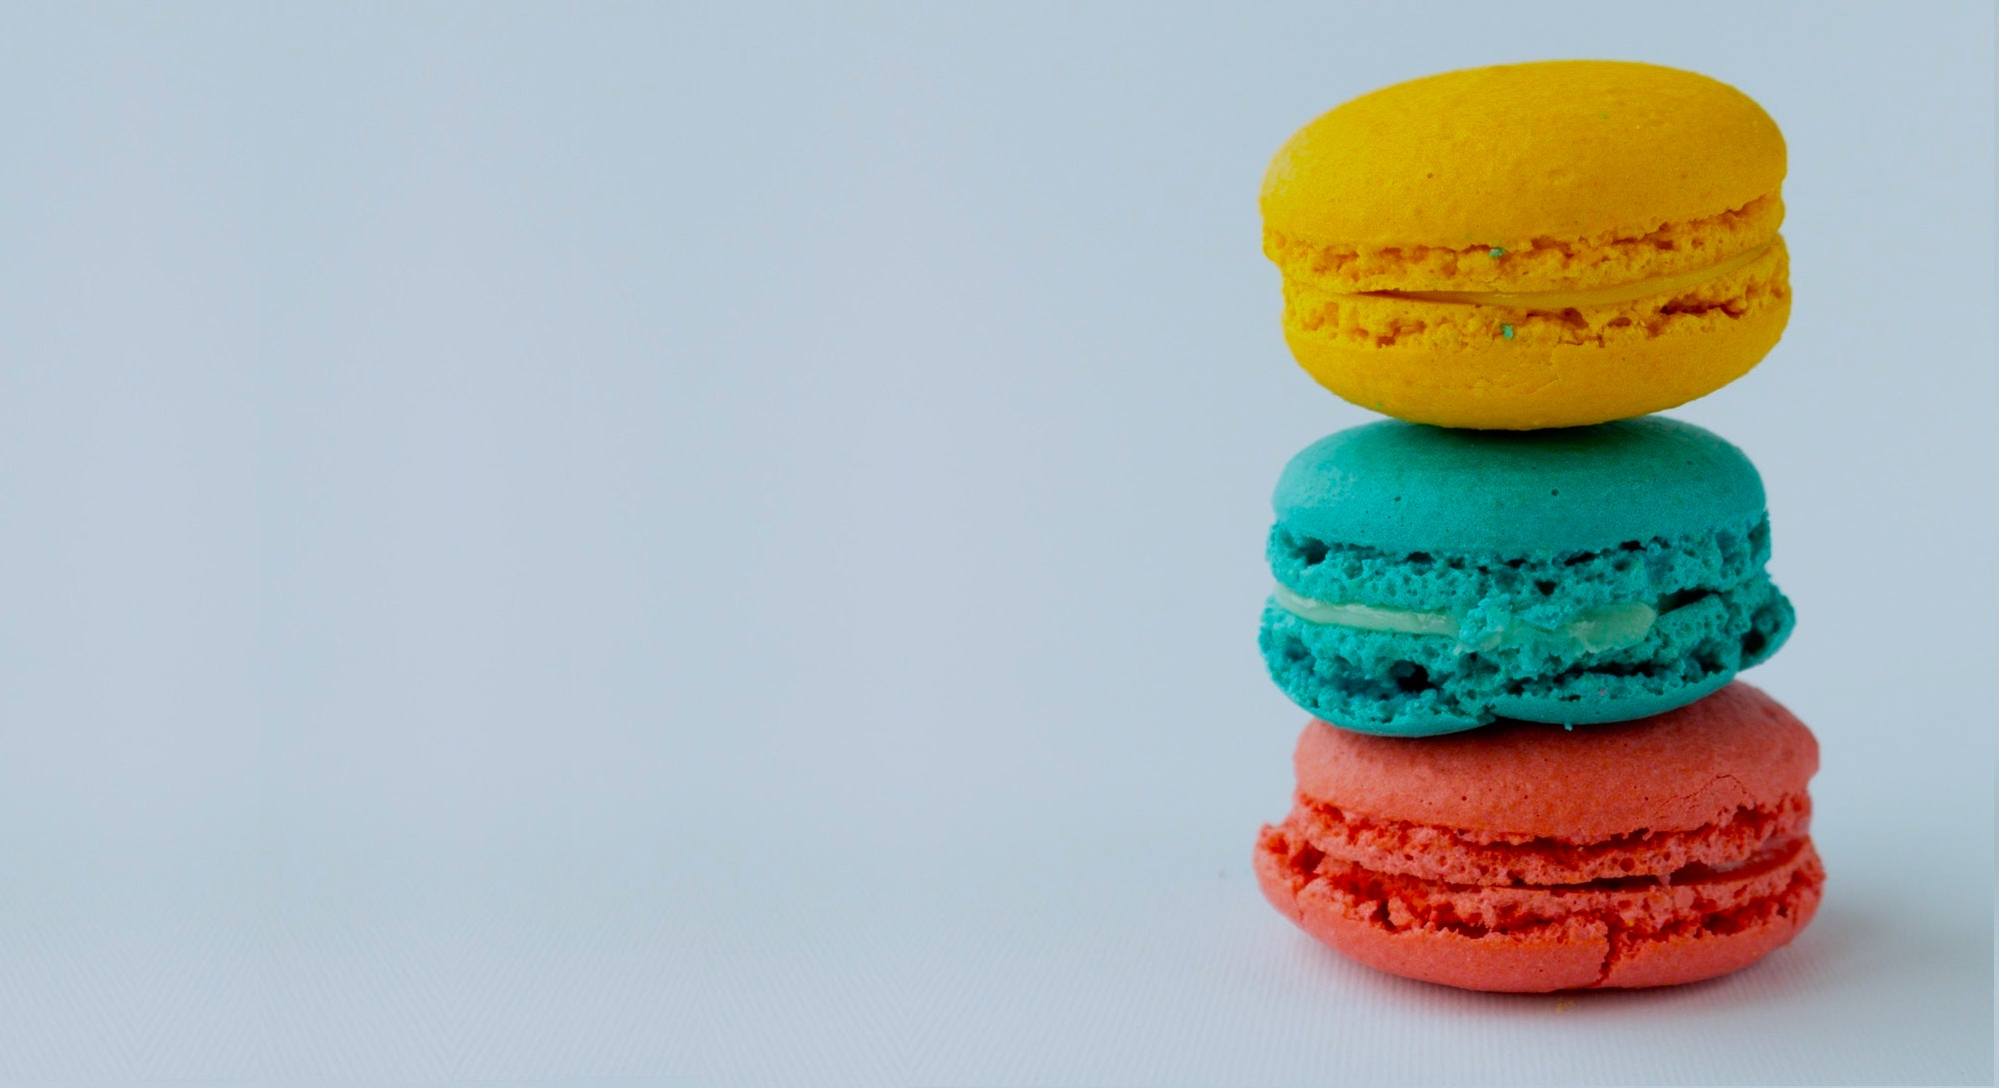 Image shows a number of macaroons stacked on top of each other